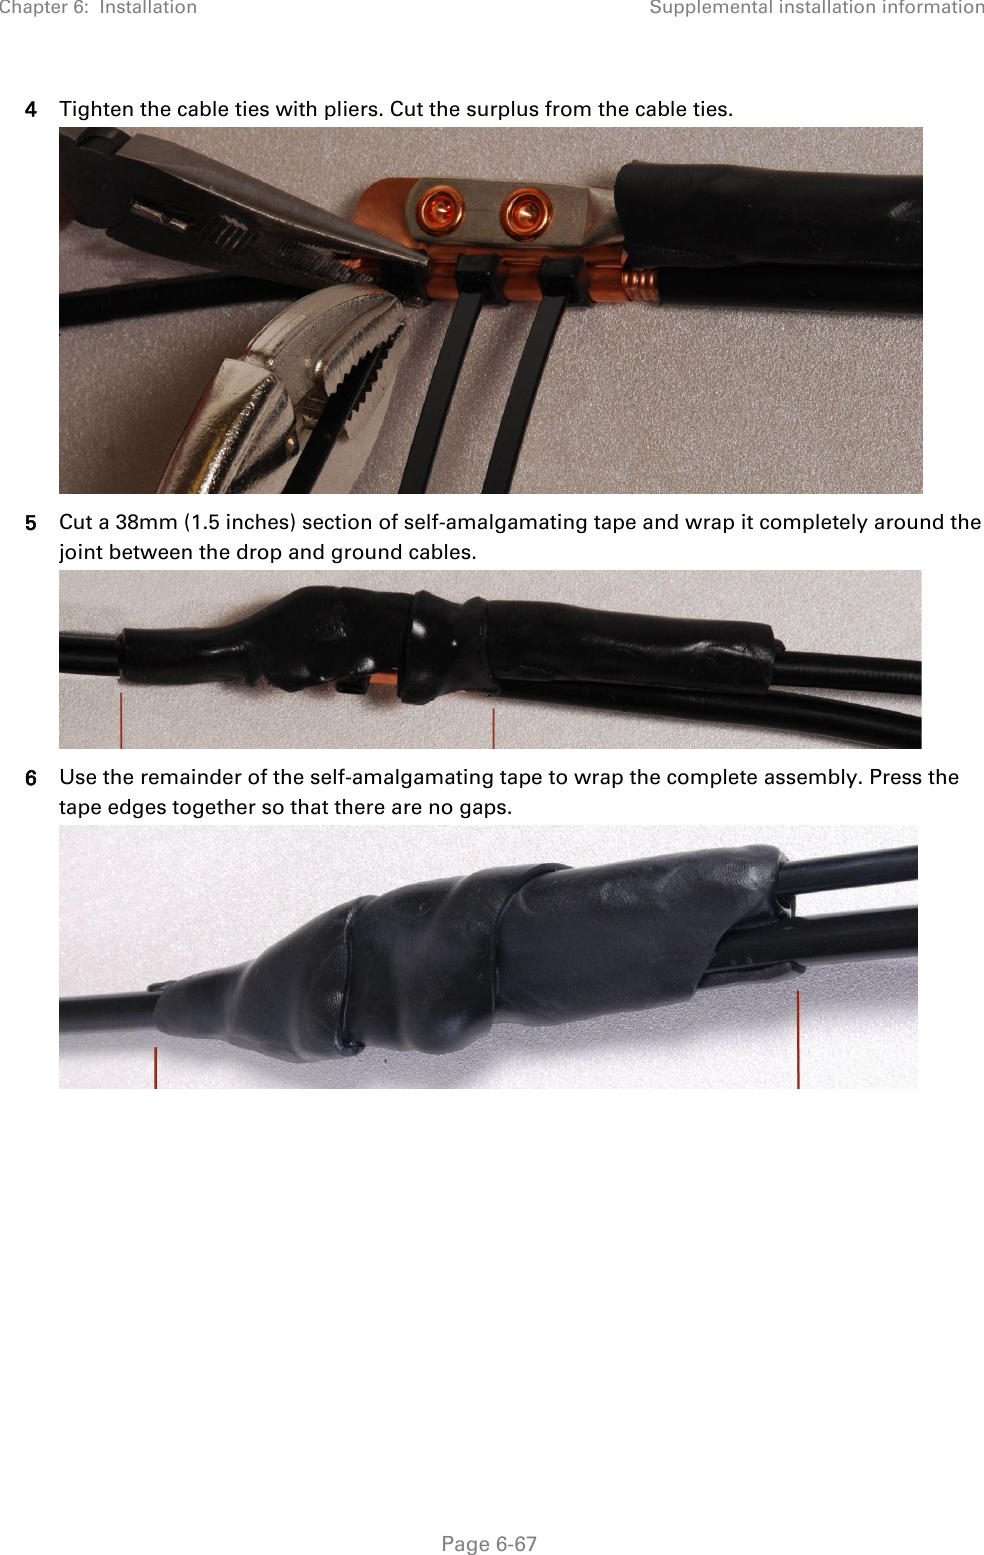 Chapter 6:  Installation Supplemental installation information   Page 6-67 4 Tighten the cable ties with pliers. Cut the surplus from the cable ties.  5 Cut a 38mm (1.5 inches) section of self-amalgamating tape and wrap it completely around the joint between the drop and ground cables.  6 Use the remainder of the self-amalgamating tape to wrap the complete assembly. Press the tape edges together so that there are no gaps.  